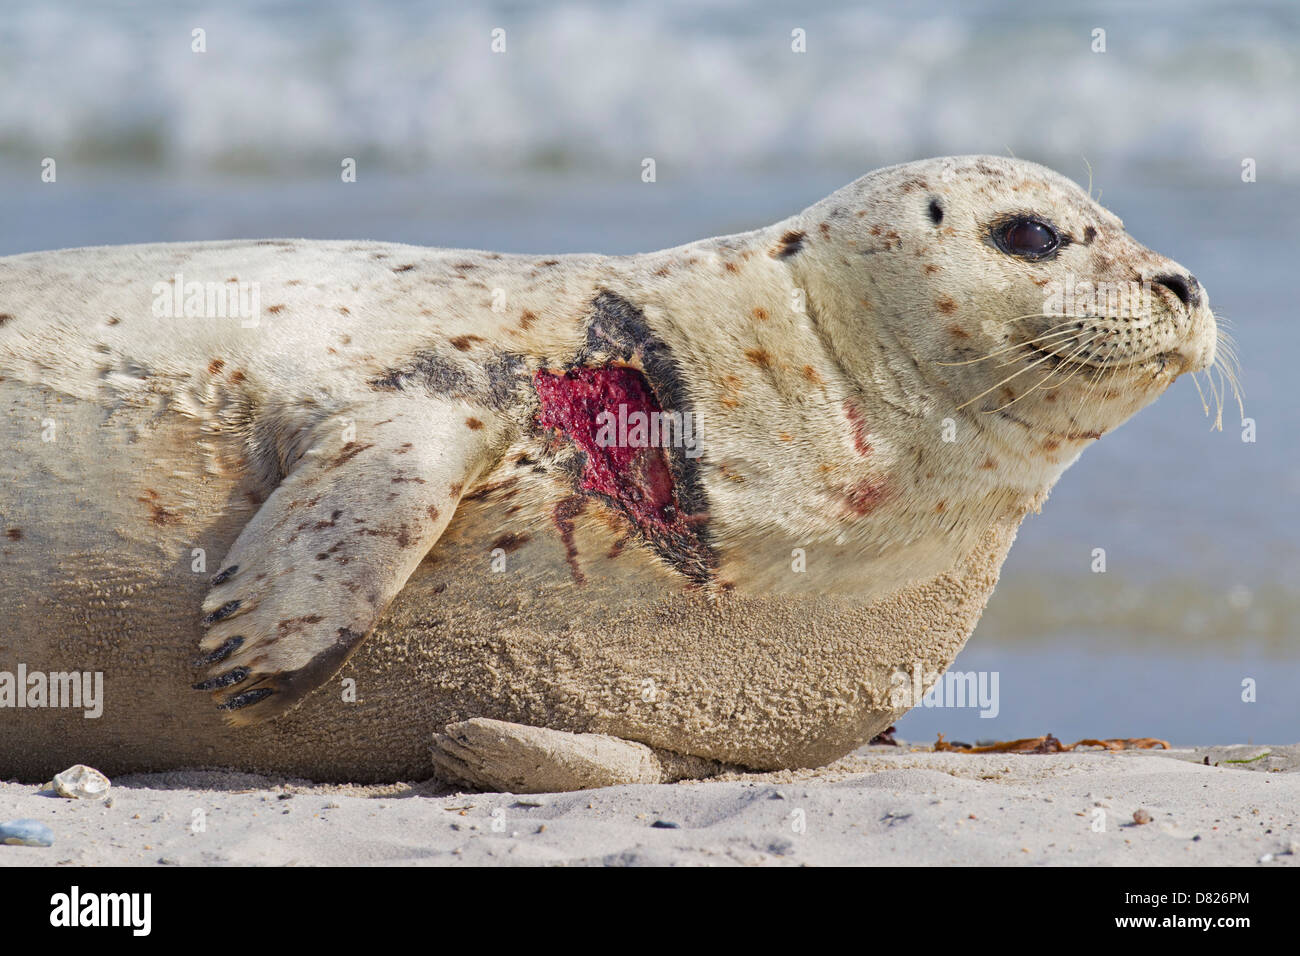 Injured Common seal / Harbour seal (Phoca vitulina) with flesh wound from boat screw propeller resting on beach Stock Photo